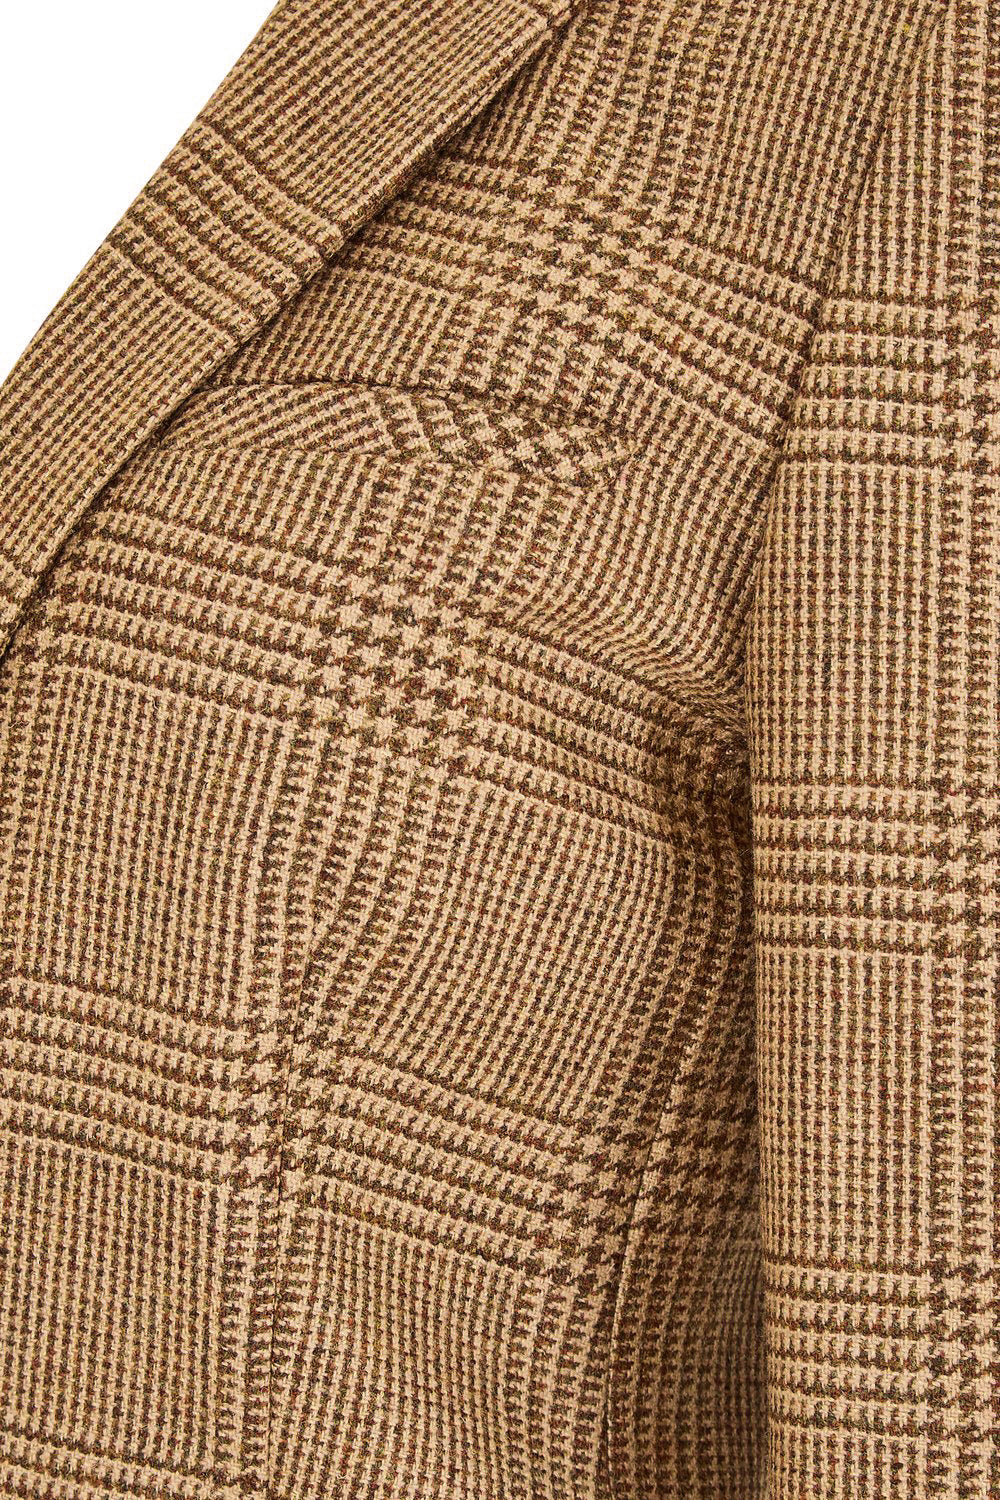 pocket detail of tan brown tweed womens coat with gold hardware and brown suede detailing